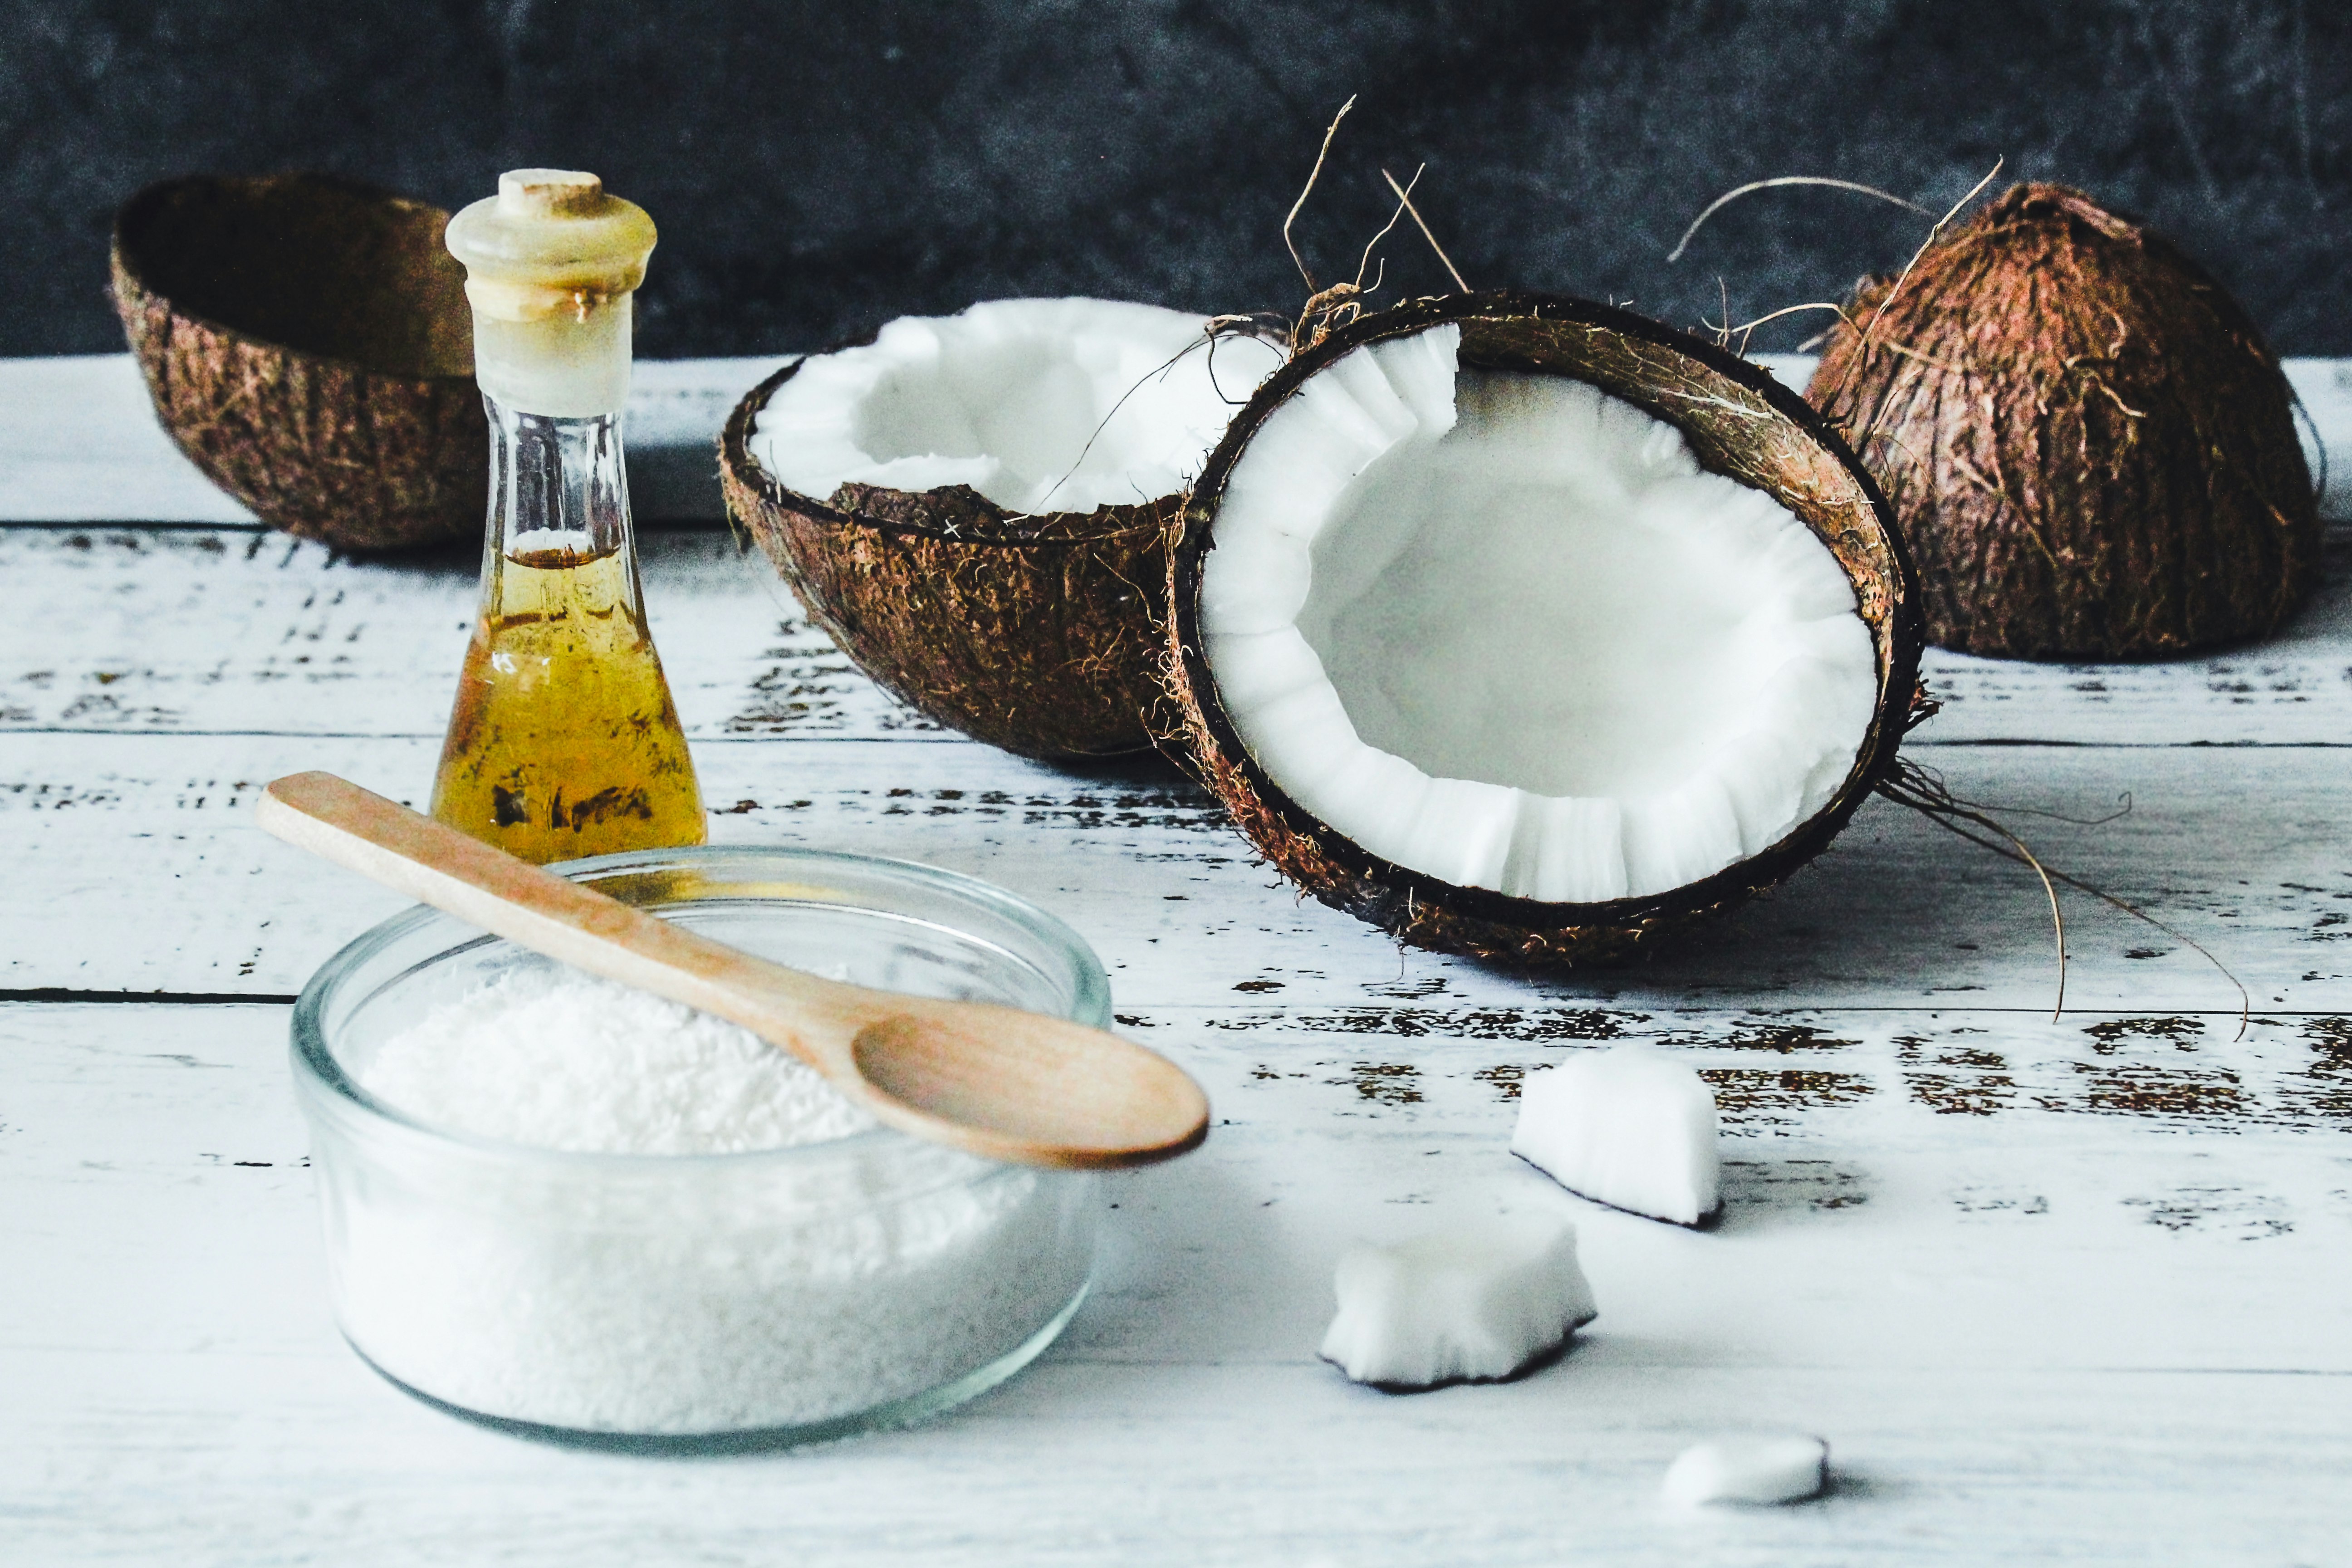 Is coconut oil good for infant eczema? Other natural remedies for eczema